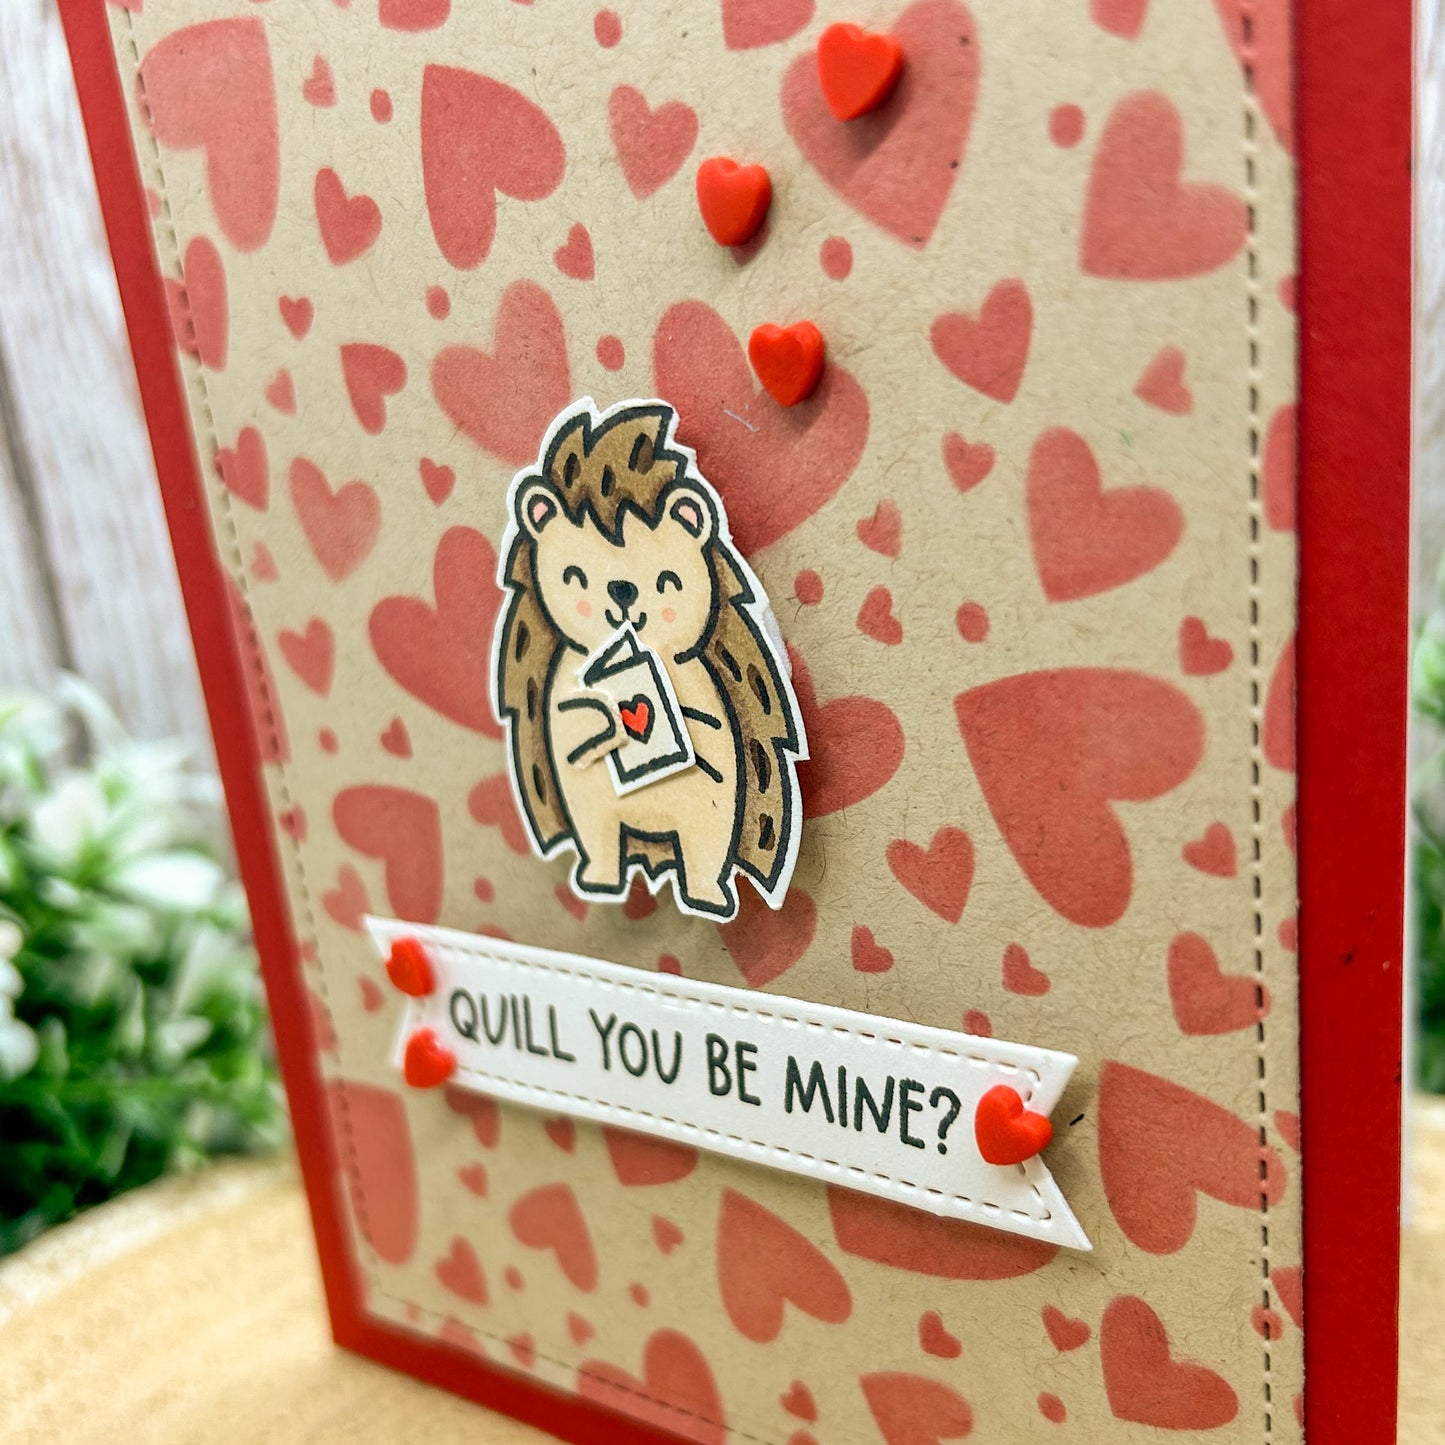 Hedgehog Quill You Be Mine? Handmade Valentine's Day Card